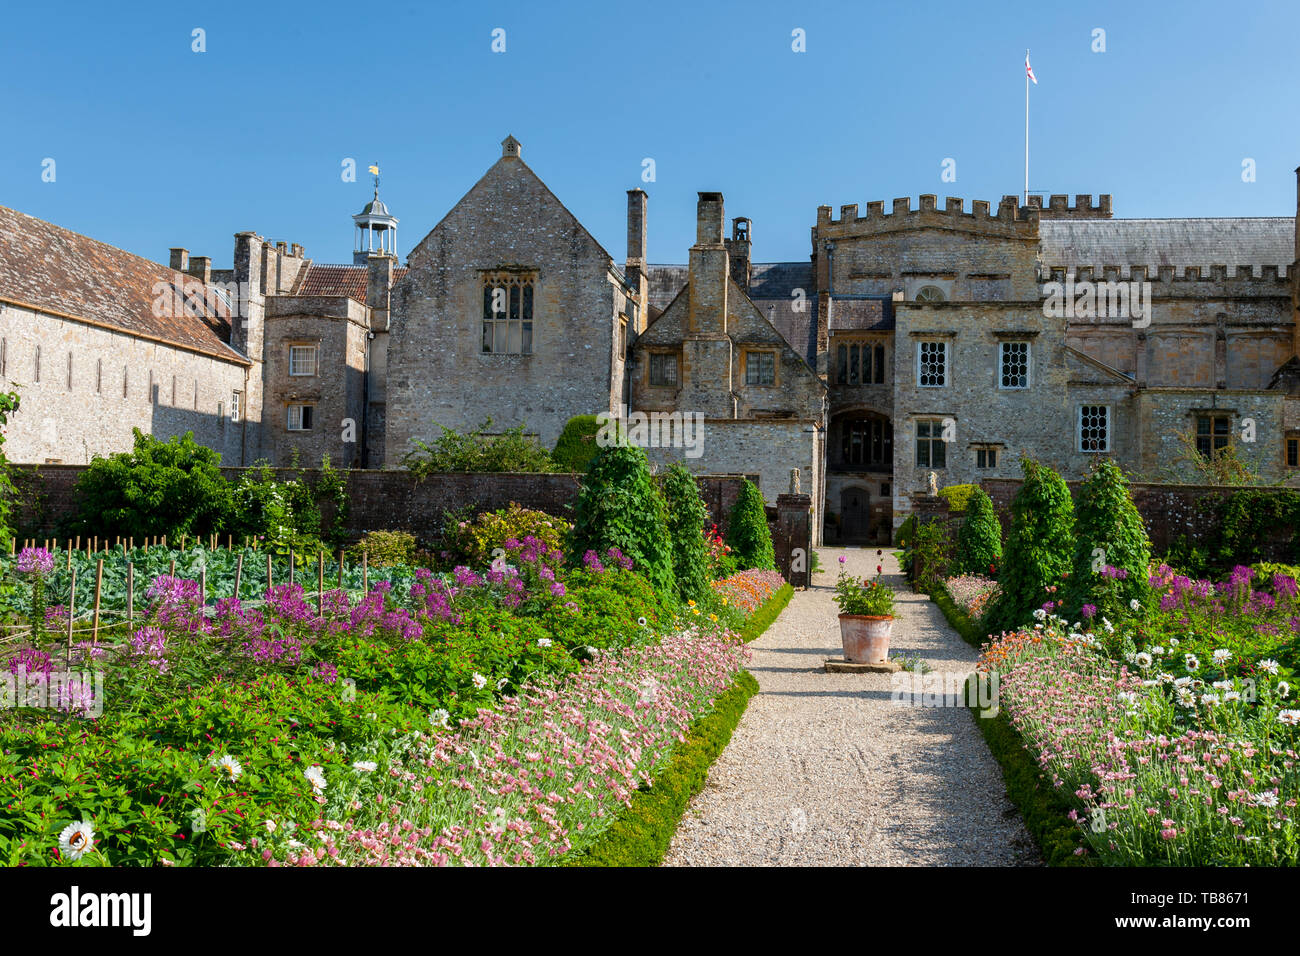 Colourful Summer Bedding Plants Surround The Vegetable Plots In The Kitchen Garden At Forde Abbey Dorset England Uk Stock Photo Alamy